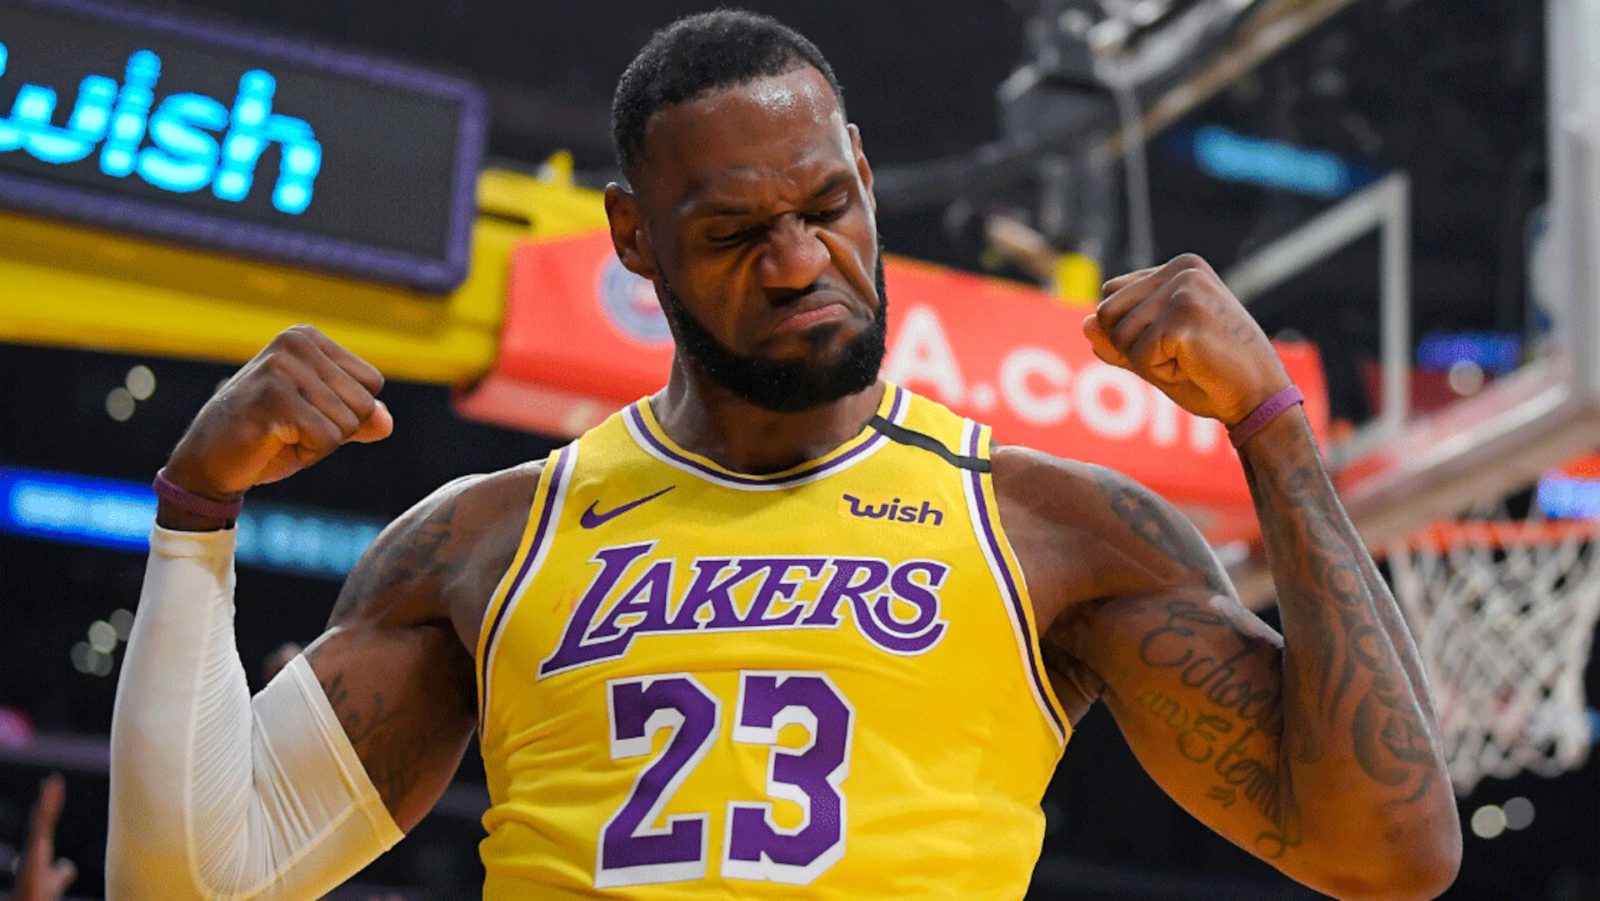 Deontay Wilder backs LeBron James: NBA star supported by heavyweight knockout artist for potential boxing debut